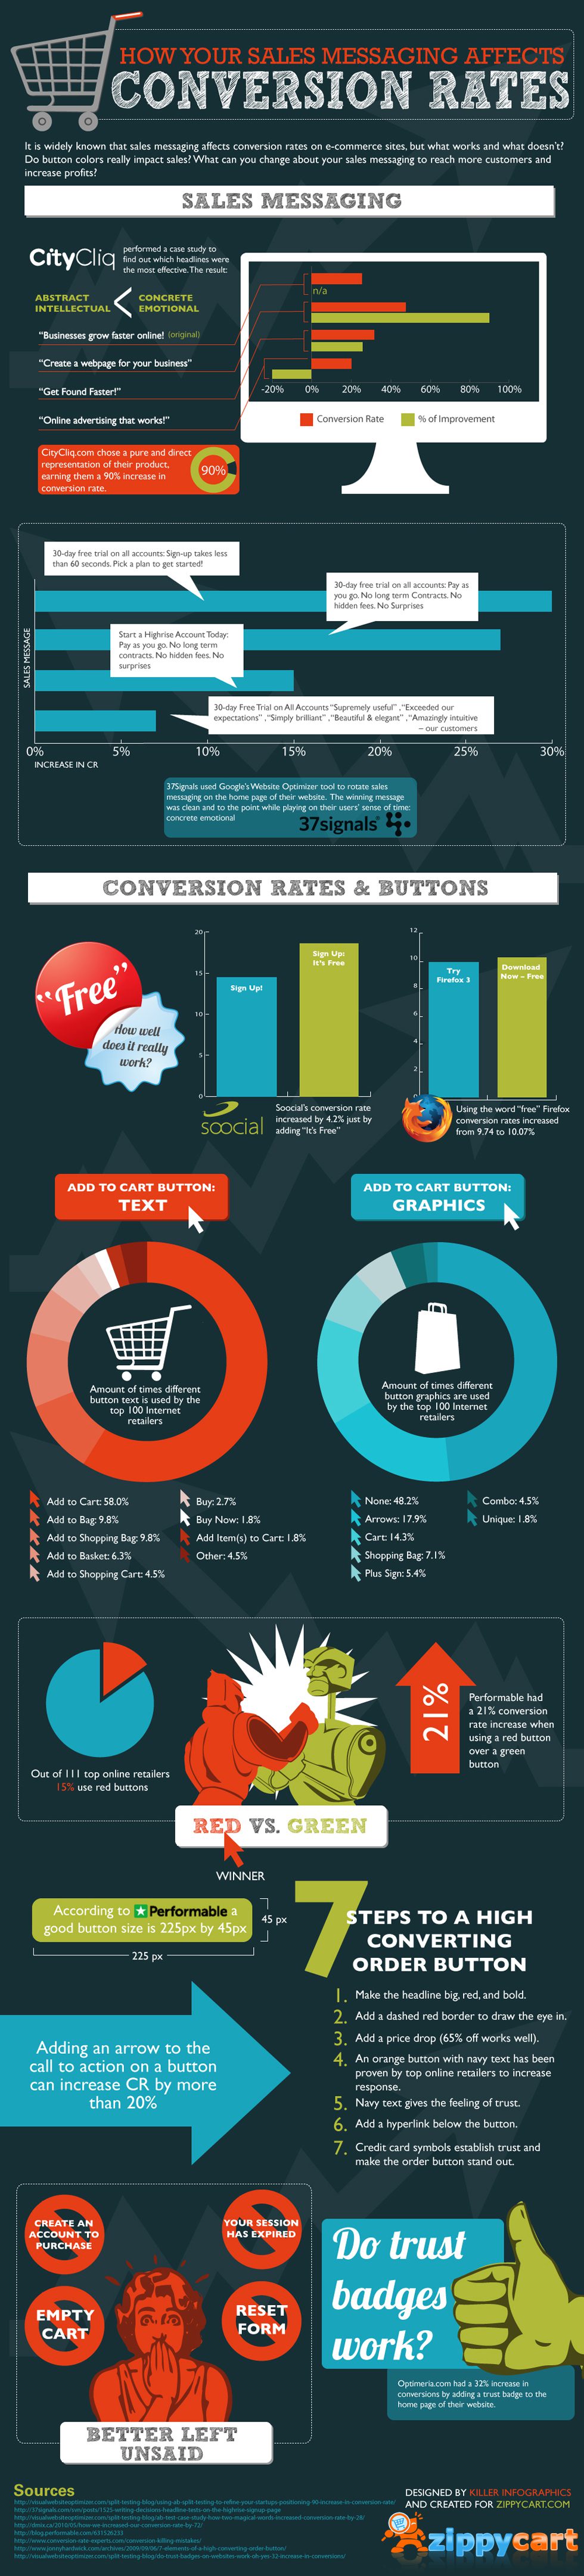 sales-messaging-and-conversion-rates-infographic